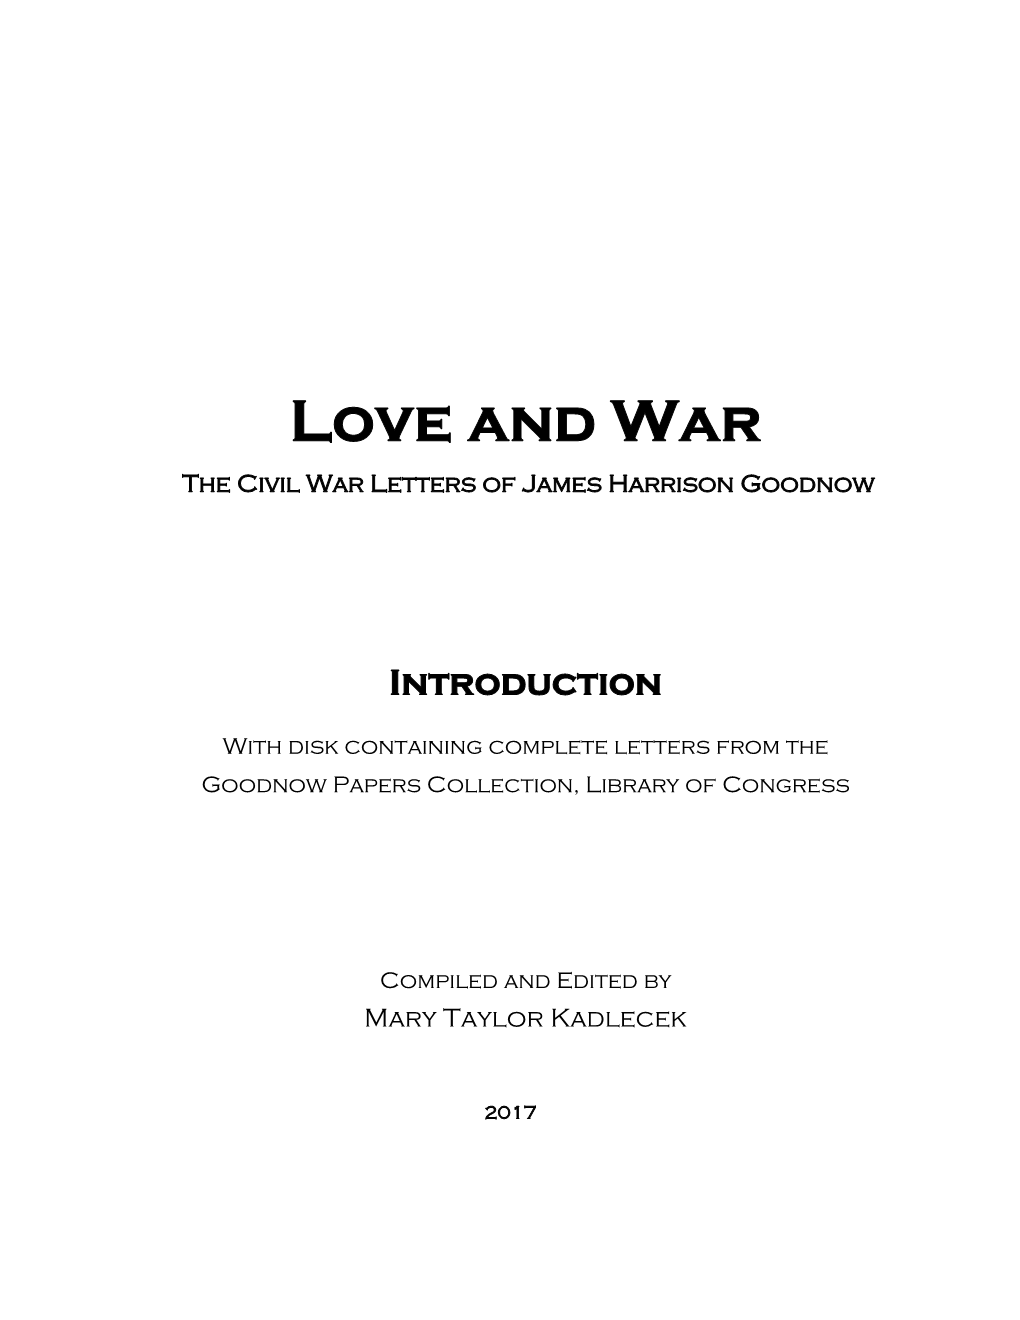 Love and War – the Civil War Letters of James Harrison Goodnow